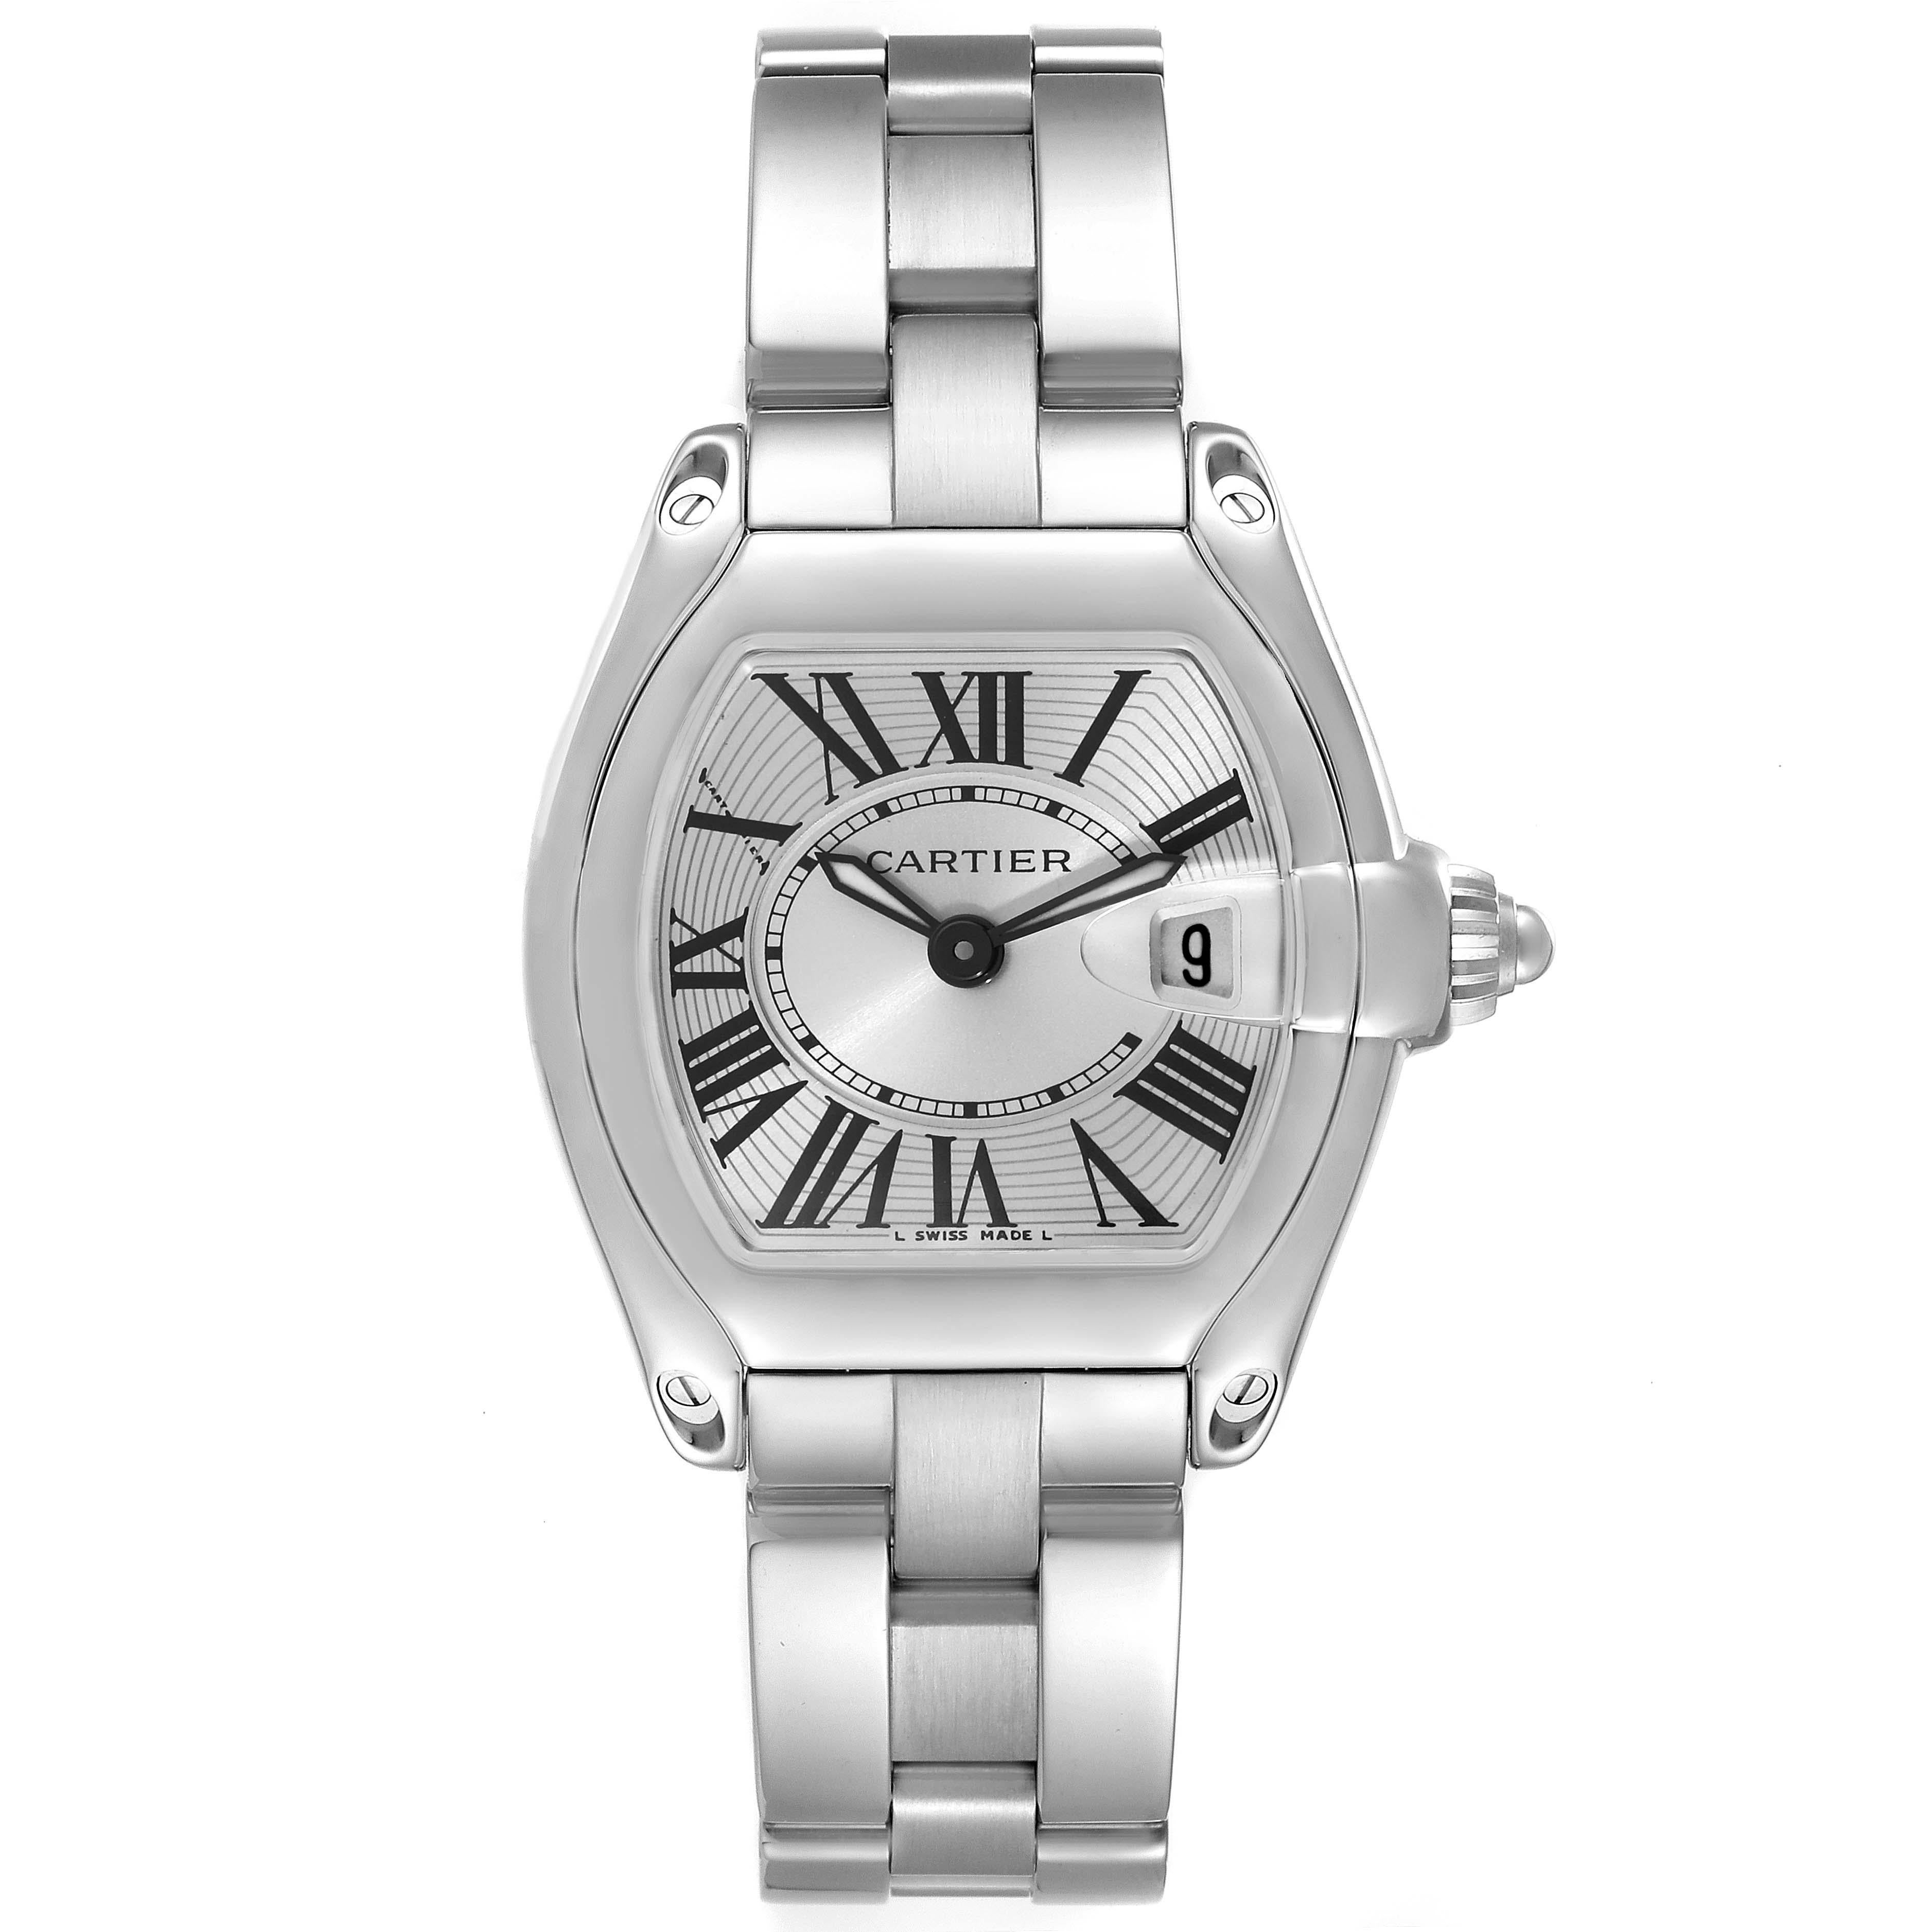 Cartier Roadster Small Silver Dial Steel Ladies Watch W62016V3 Box Papers. Swiss quartz movement. Stainless steel tonneau shaped case 36 x 30 mm. . Scratch resistant sapphire crystal with cyclops magnifier. Silver sunray effect dial with black Roman